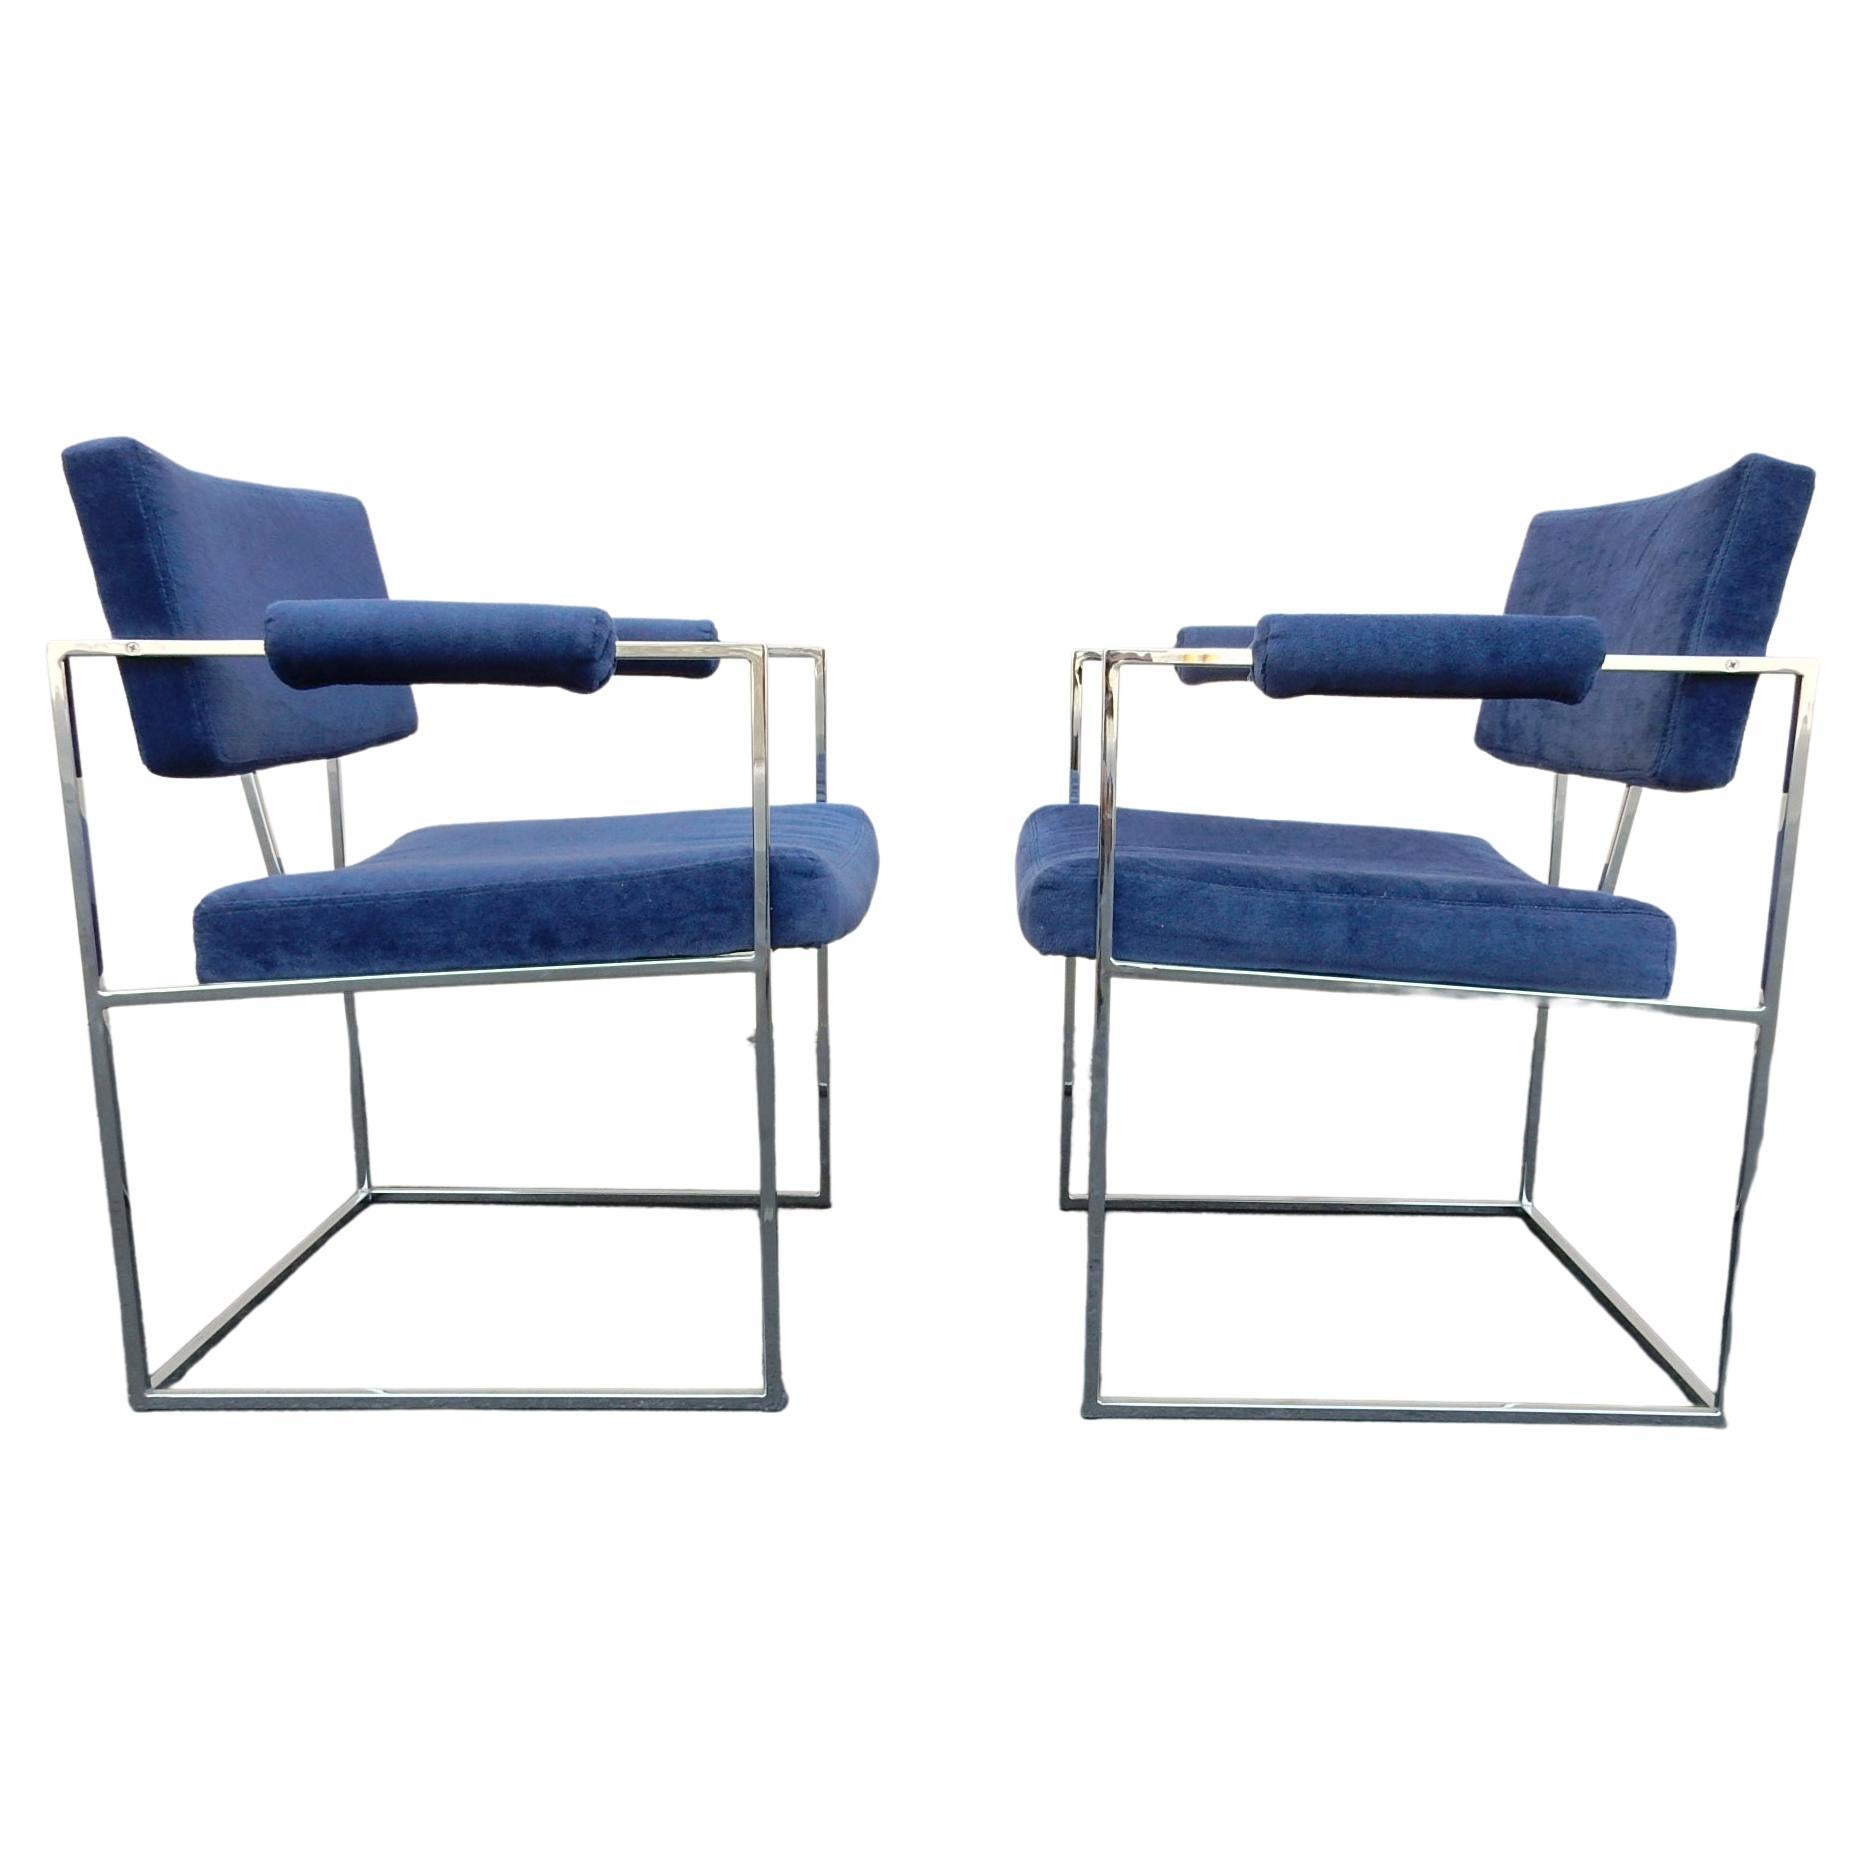 Designed by Milo Baughman this completely original set of 6 mod. 1188 dining armchairs.
Exceptional, thin and airy, chromed steel frames.
Upholstered in their original purplish blur velour.
Thayer Coggin tags attached. 

These were purchased from